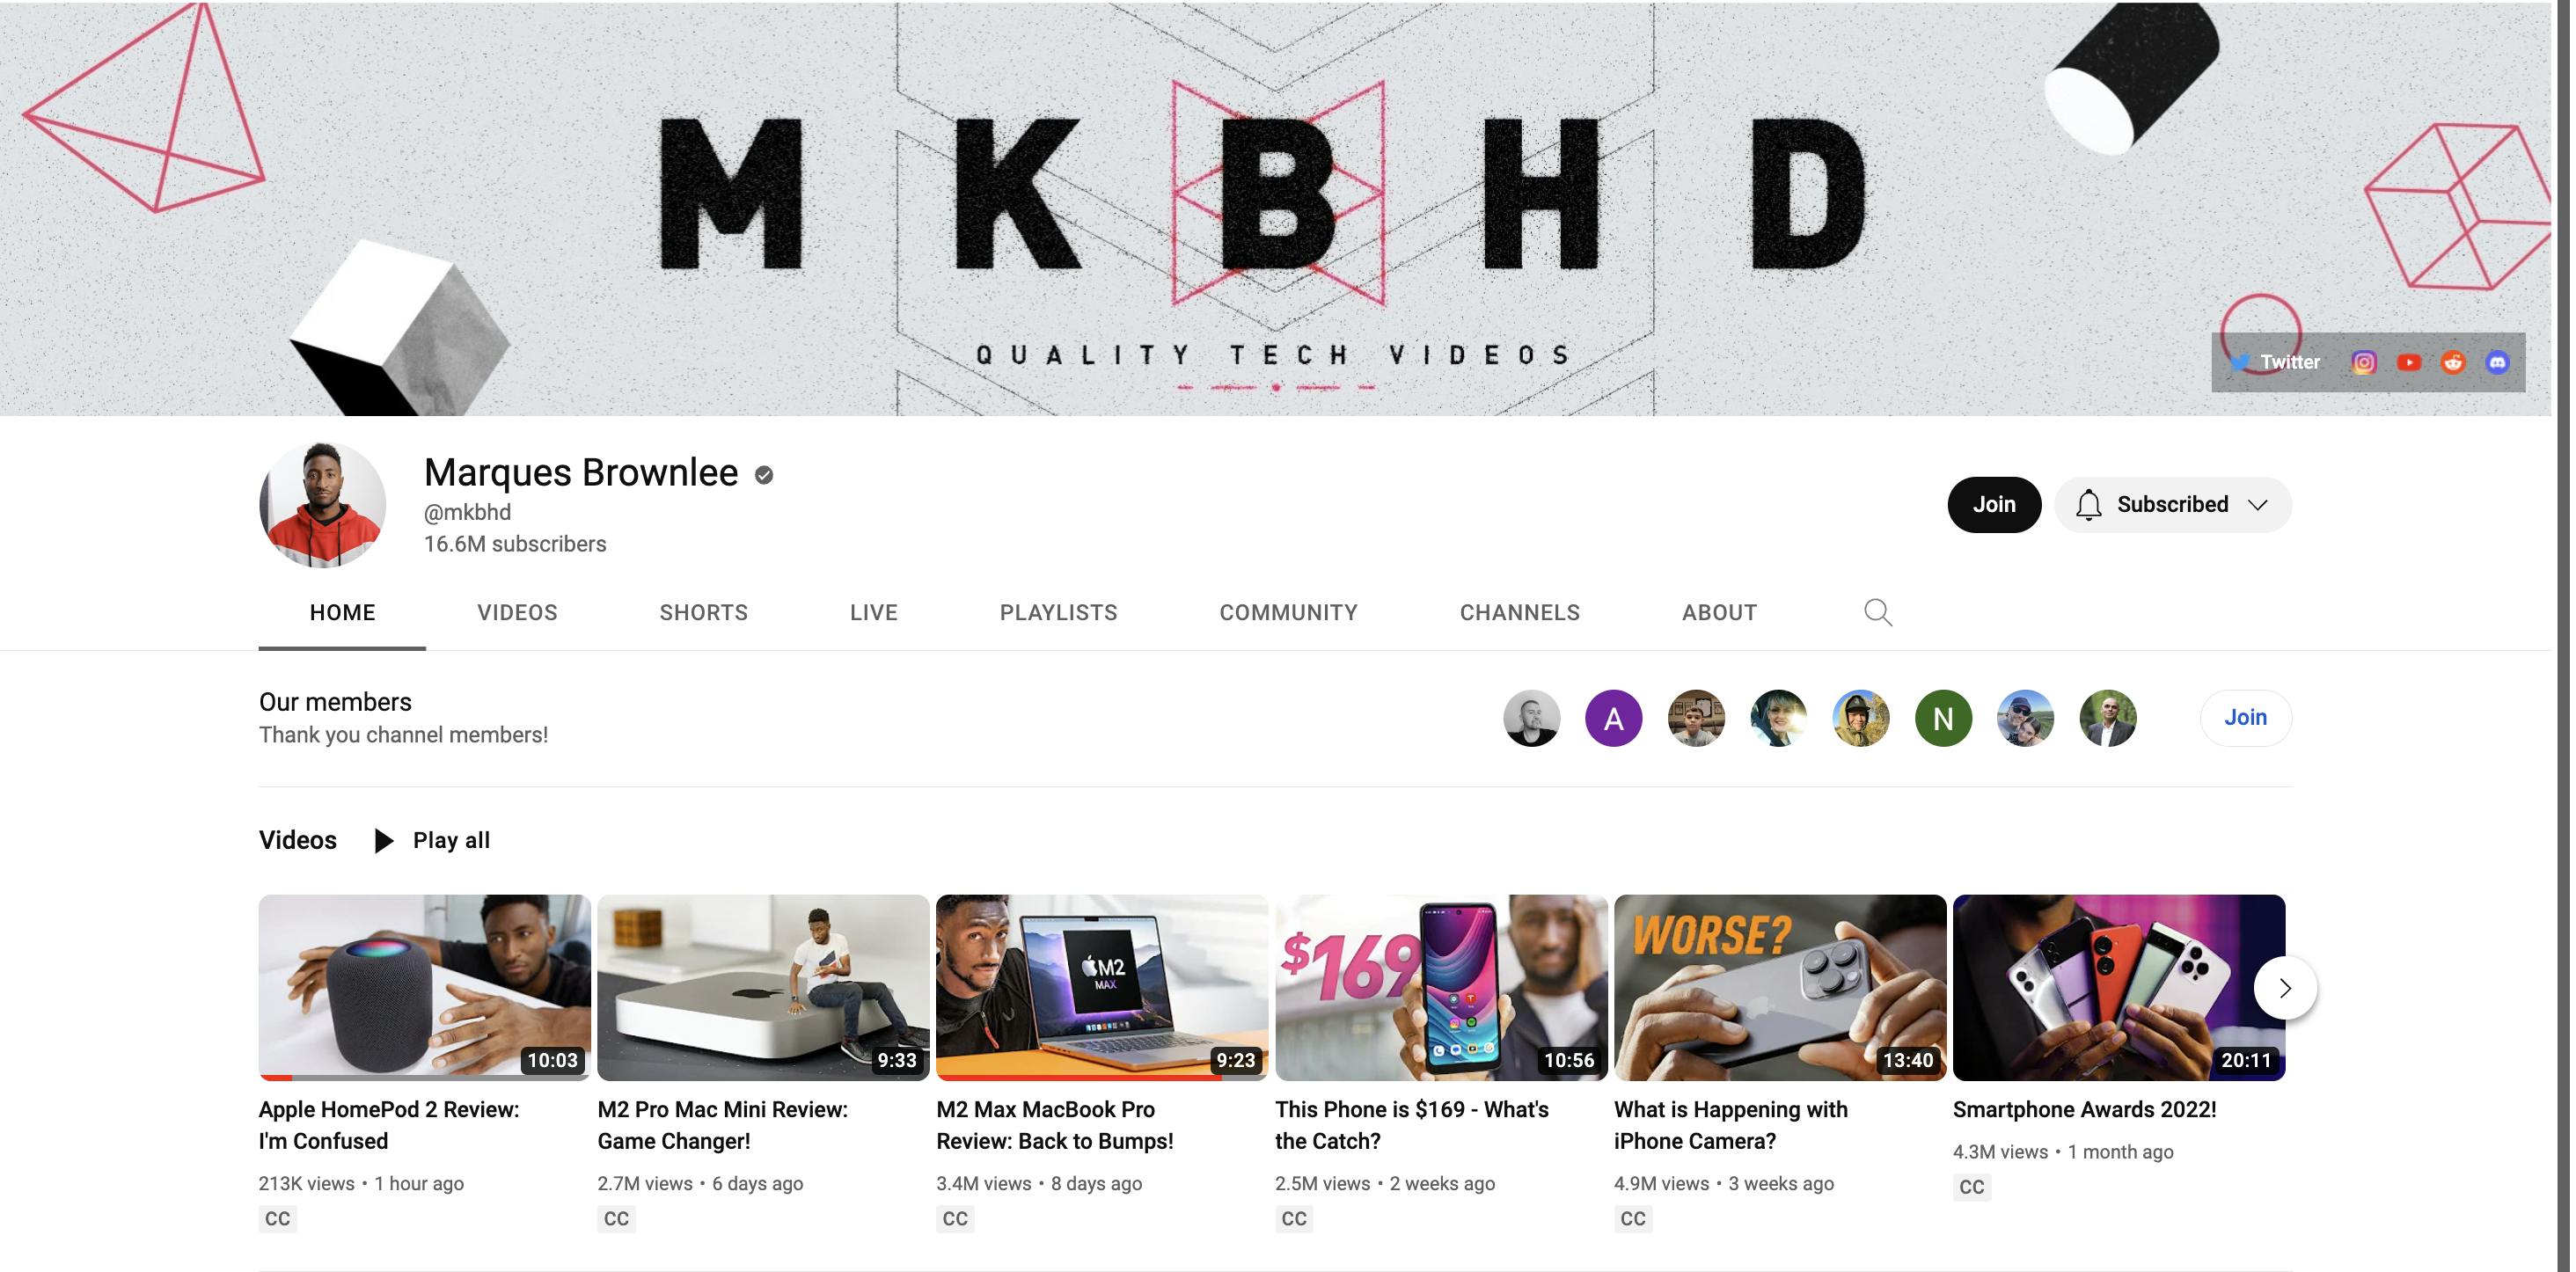 Screenshot of the MKBHD YouTube channel